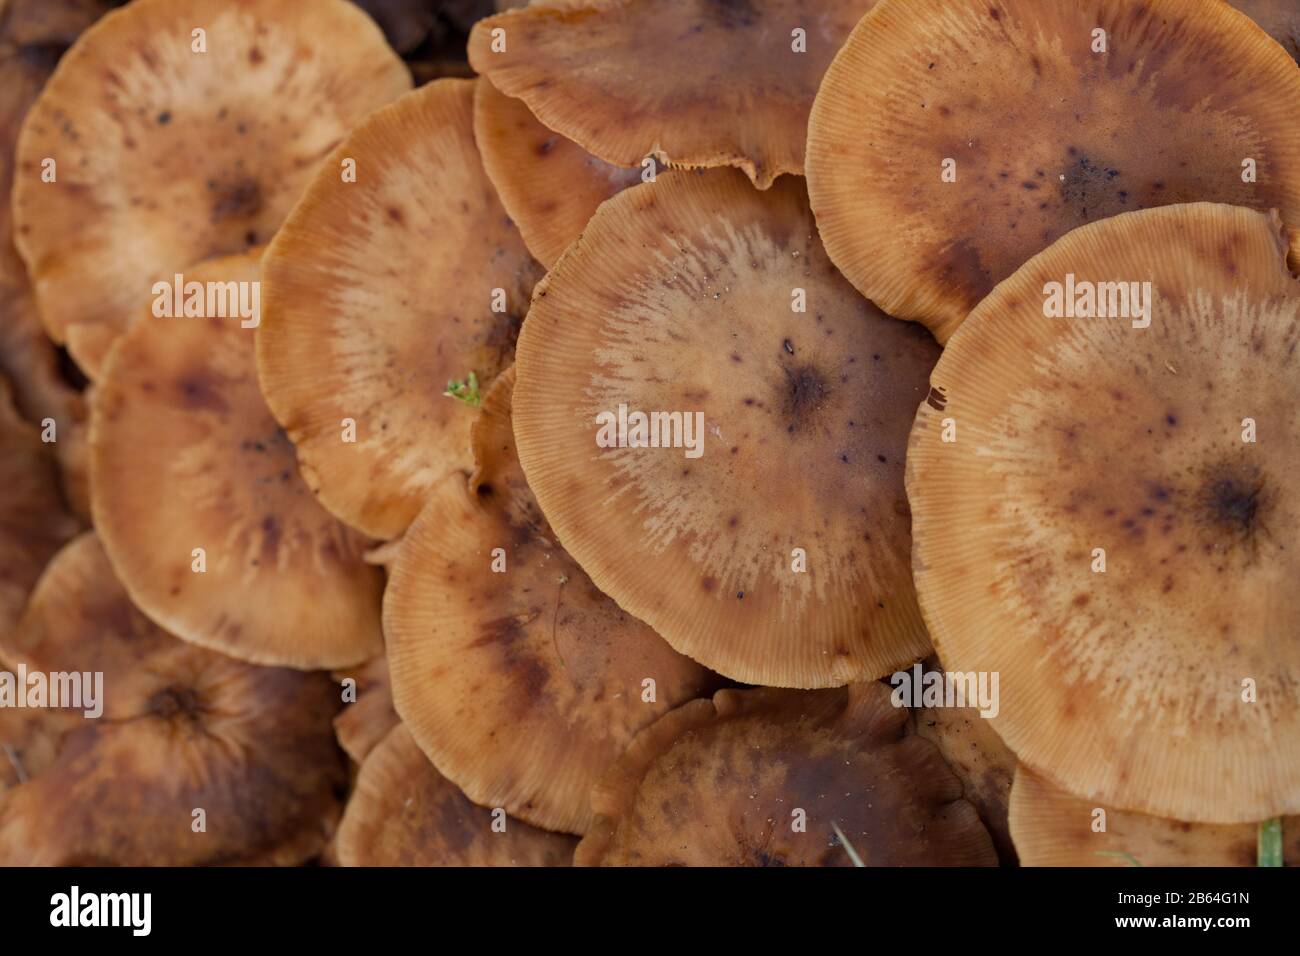 Wild mushrooms growing on the forest floor Stock Photo